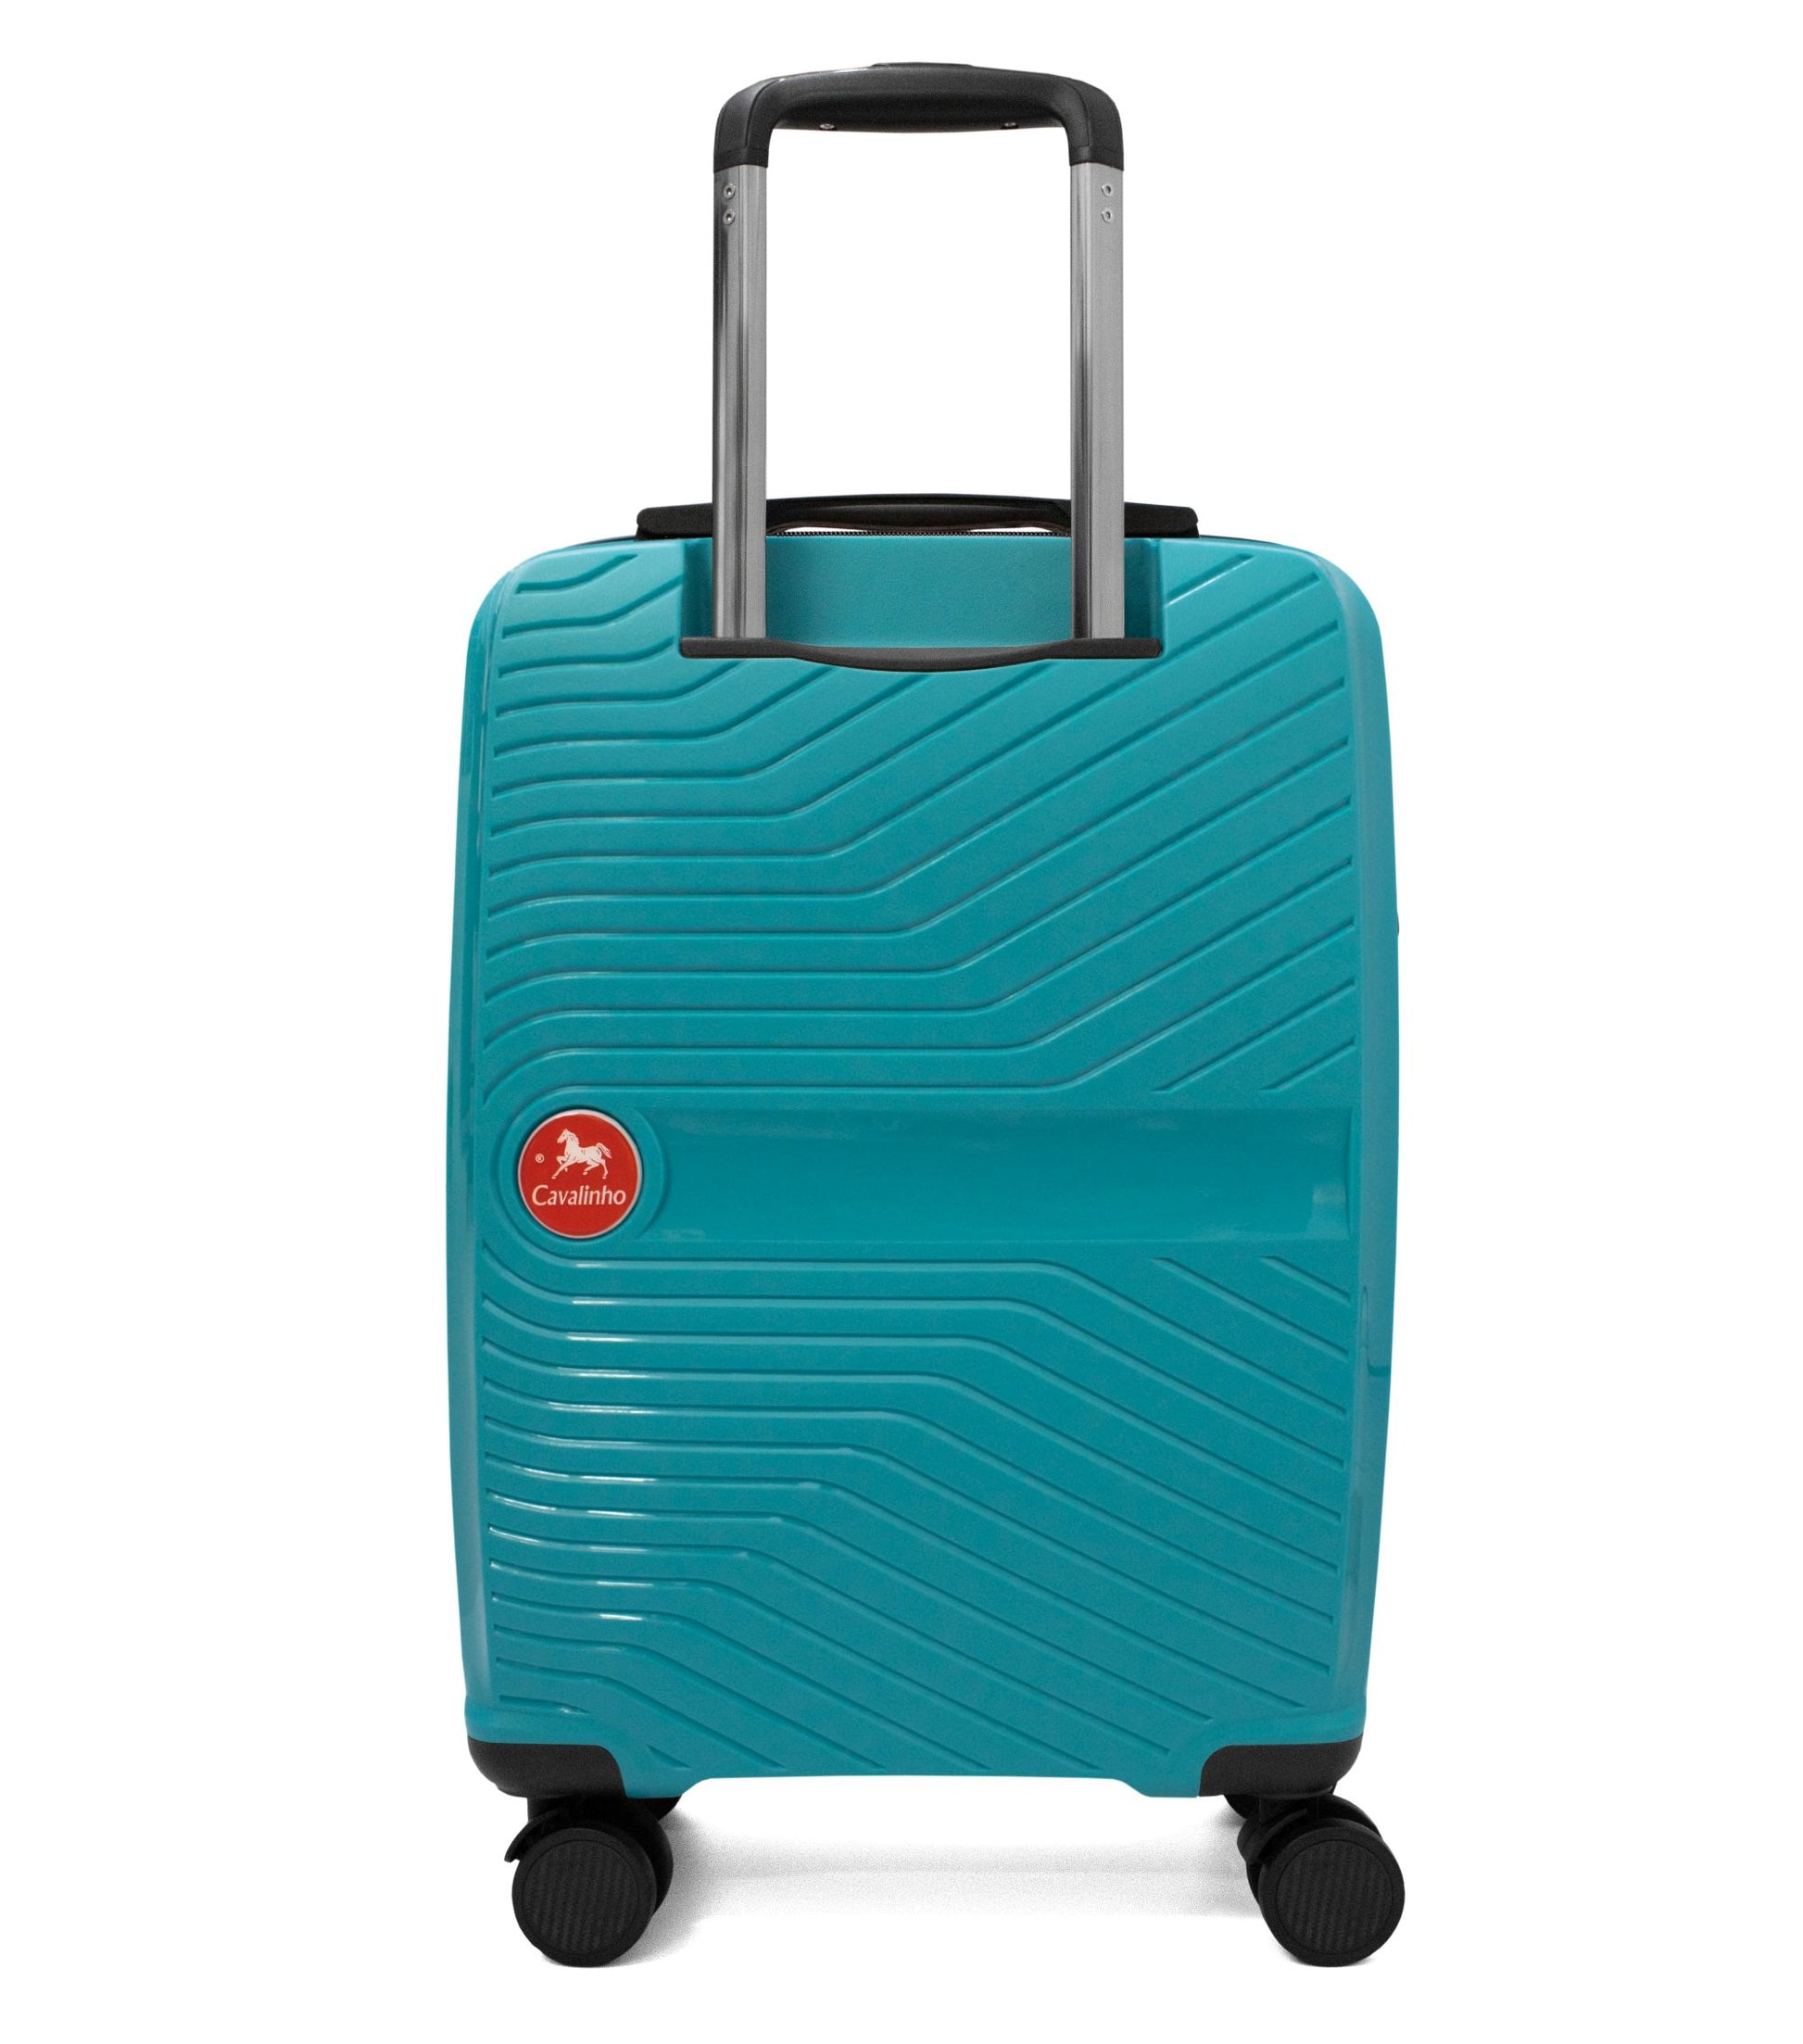 #color_ 19 inch DarkTurquoise | Cavalinho Colorful Carry-on Hardside Luggage (19") - 19 inch DarkTurquoise - 68020004.25.19_3